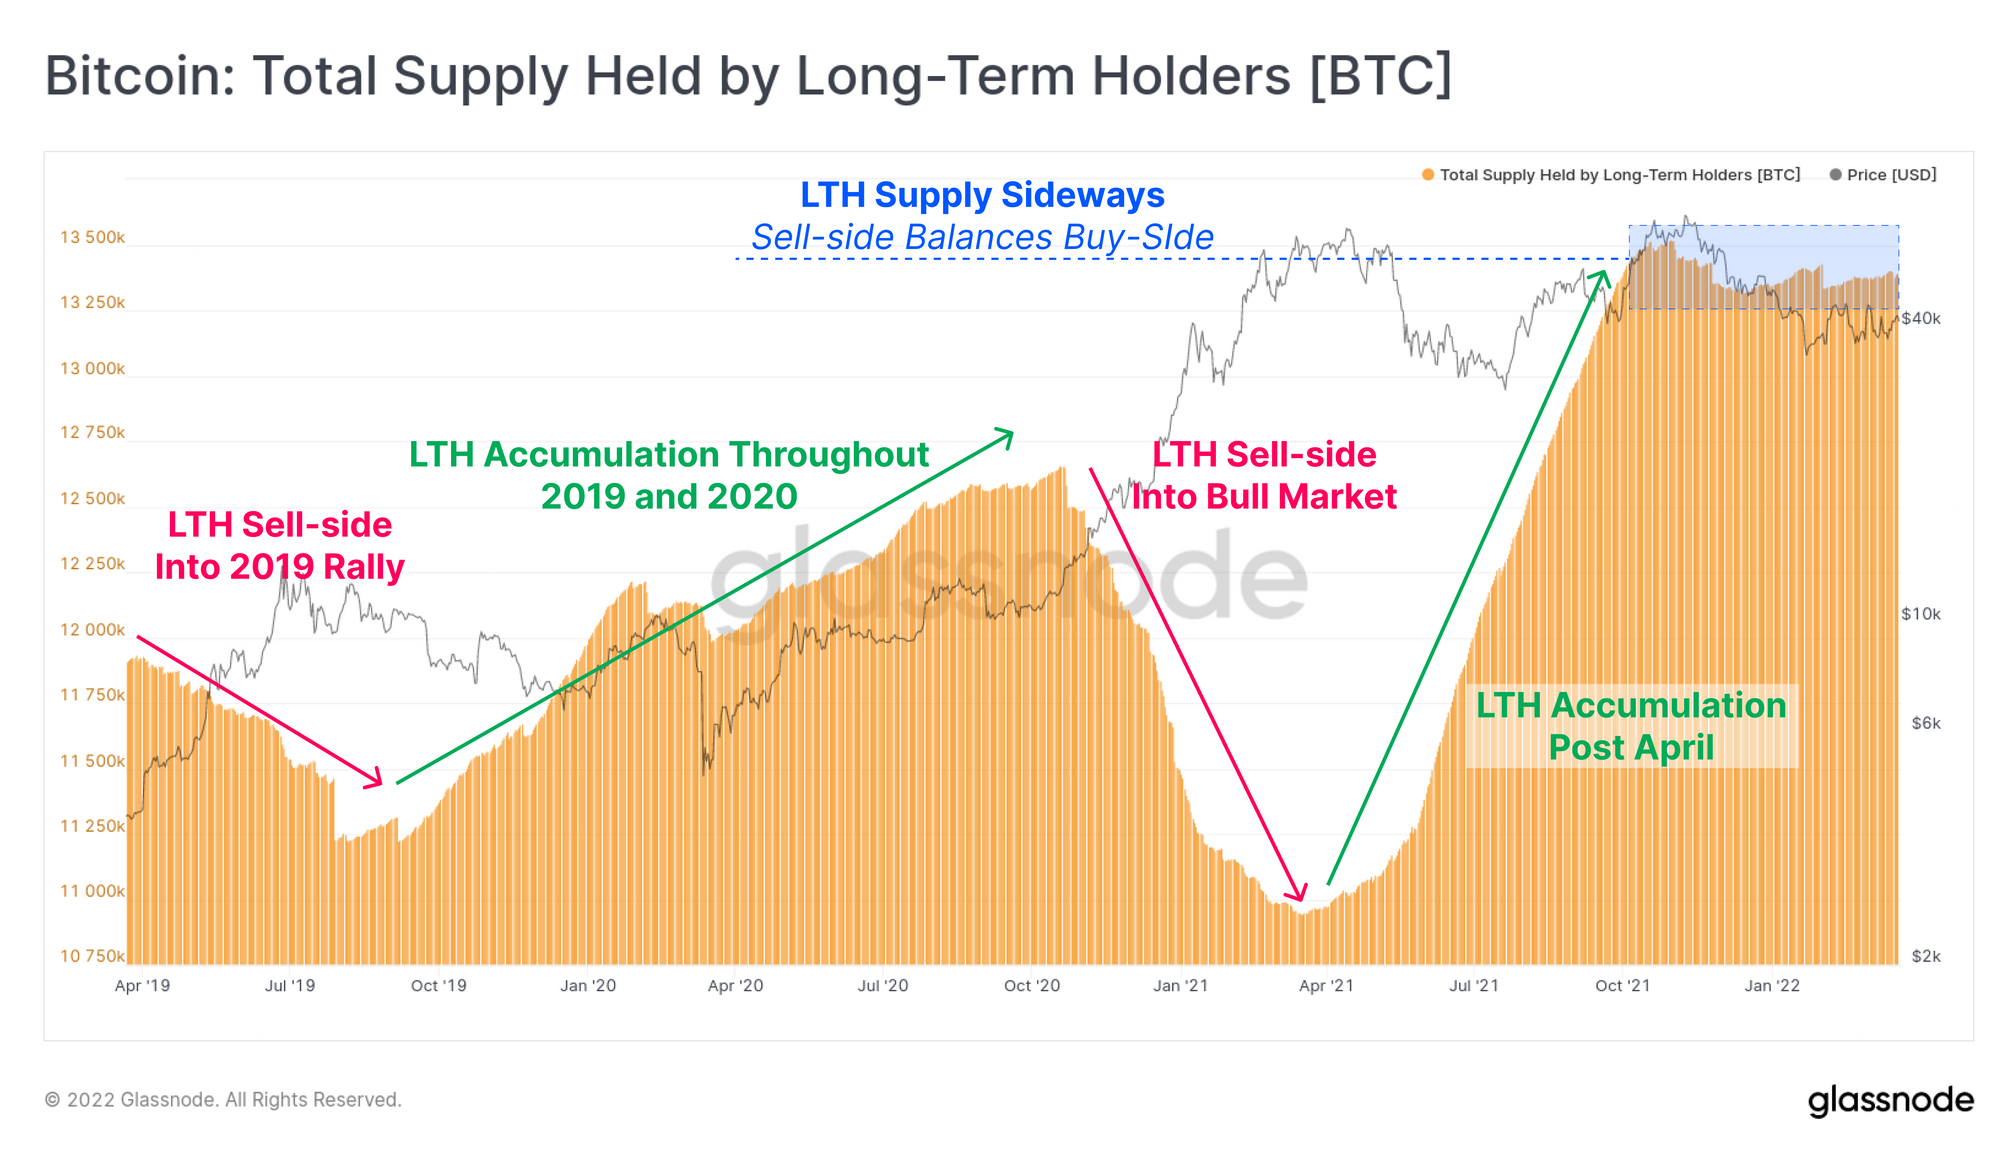 Glassnode Bitcoin: Total Supply Held by Long-Term Holders